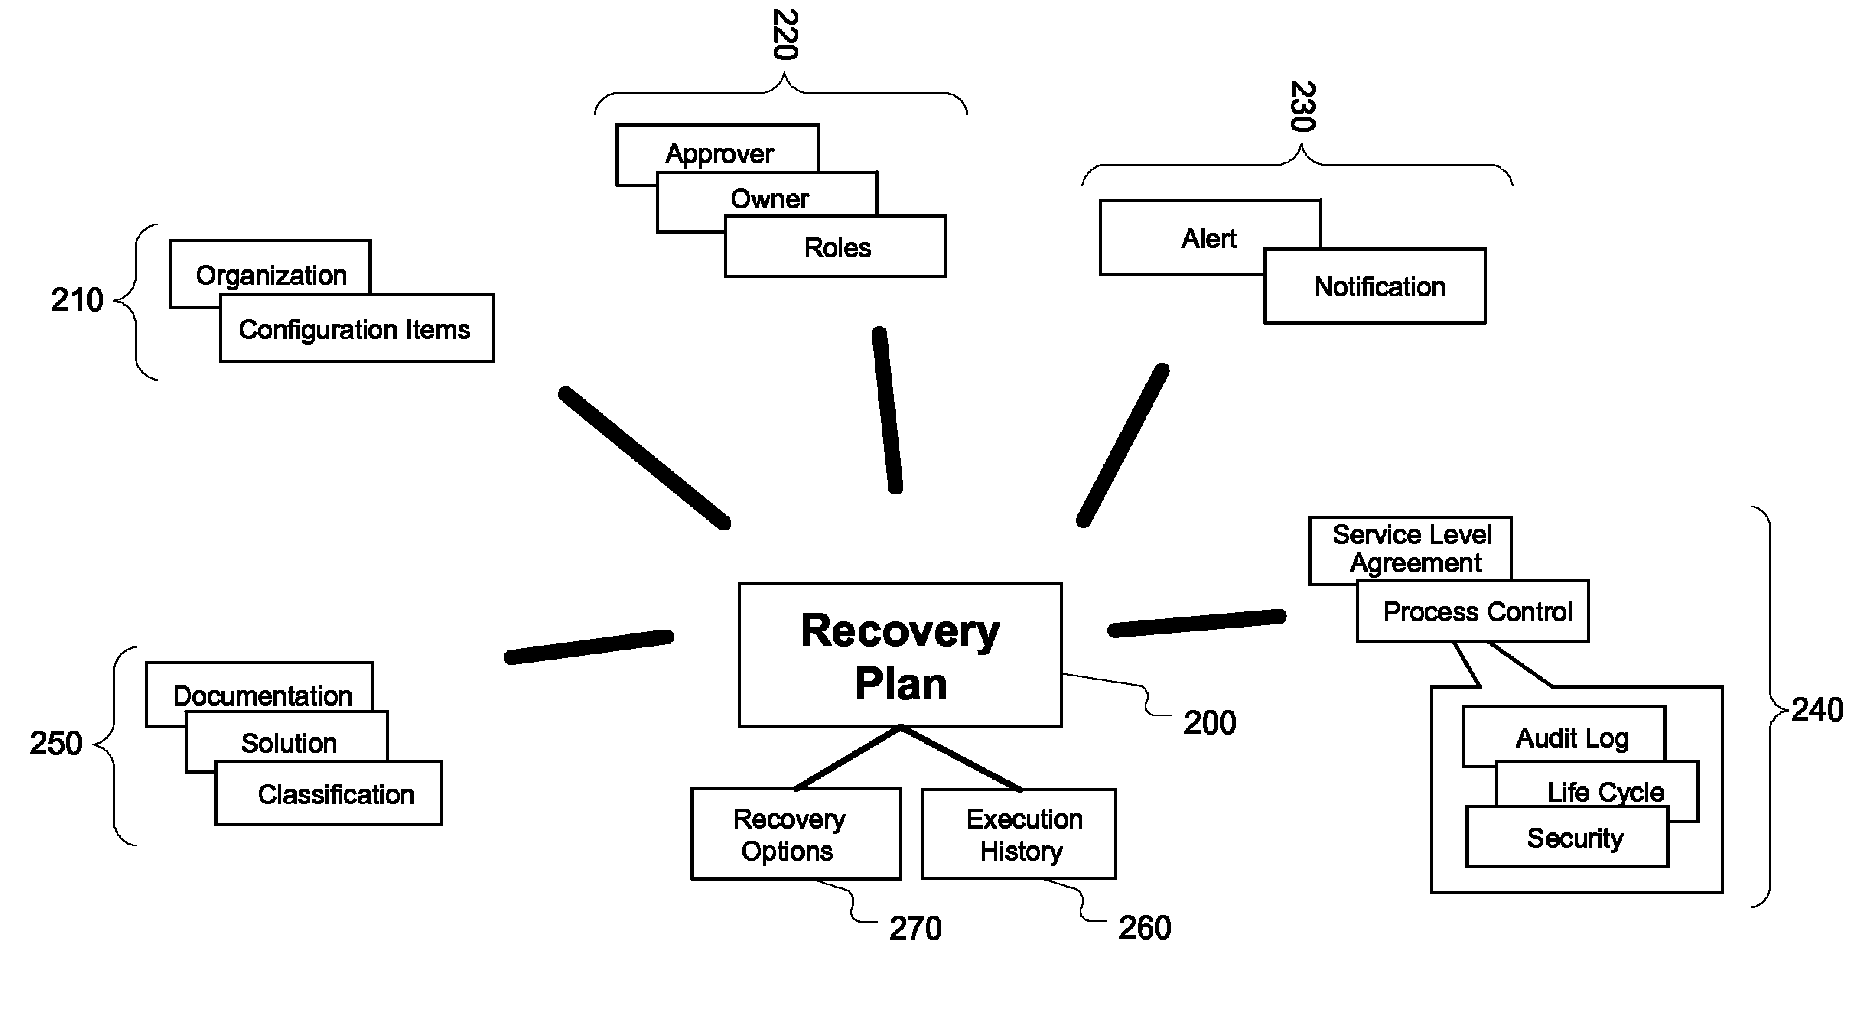 Workflow model for coordinating the recovery of IT outages based on integrated recovery plans